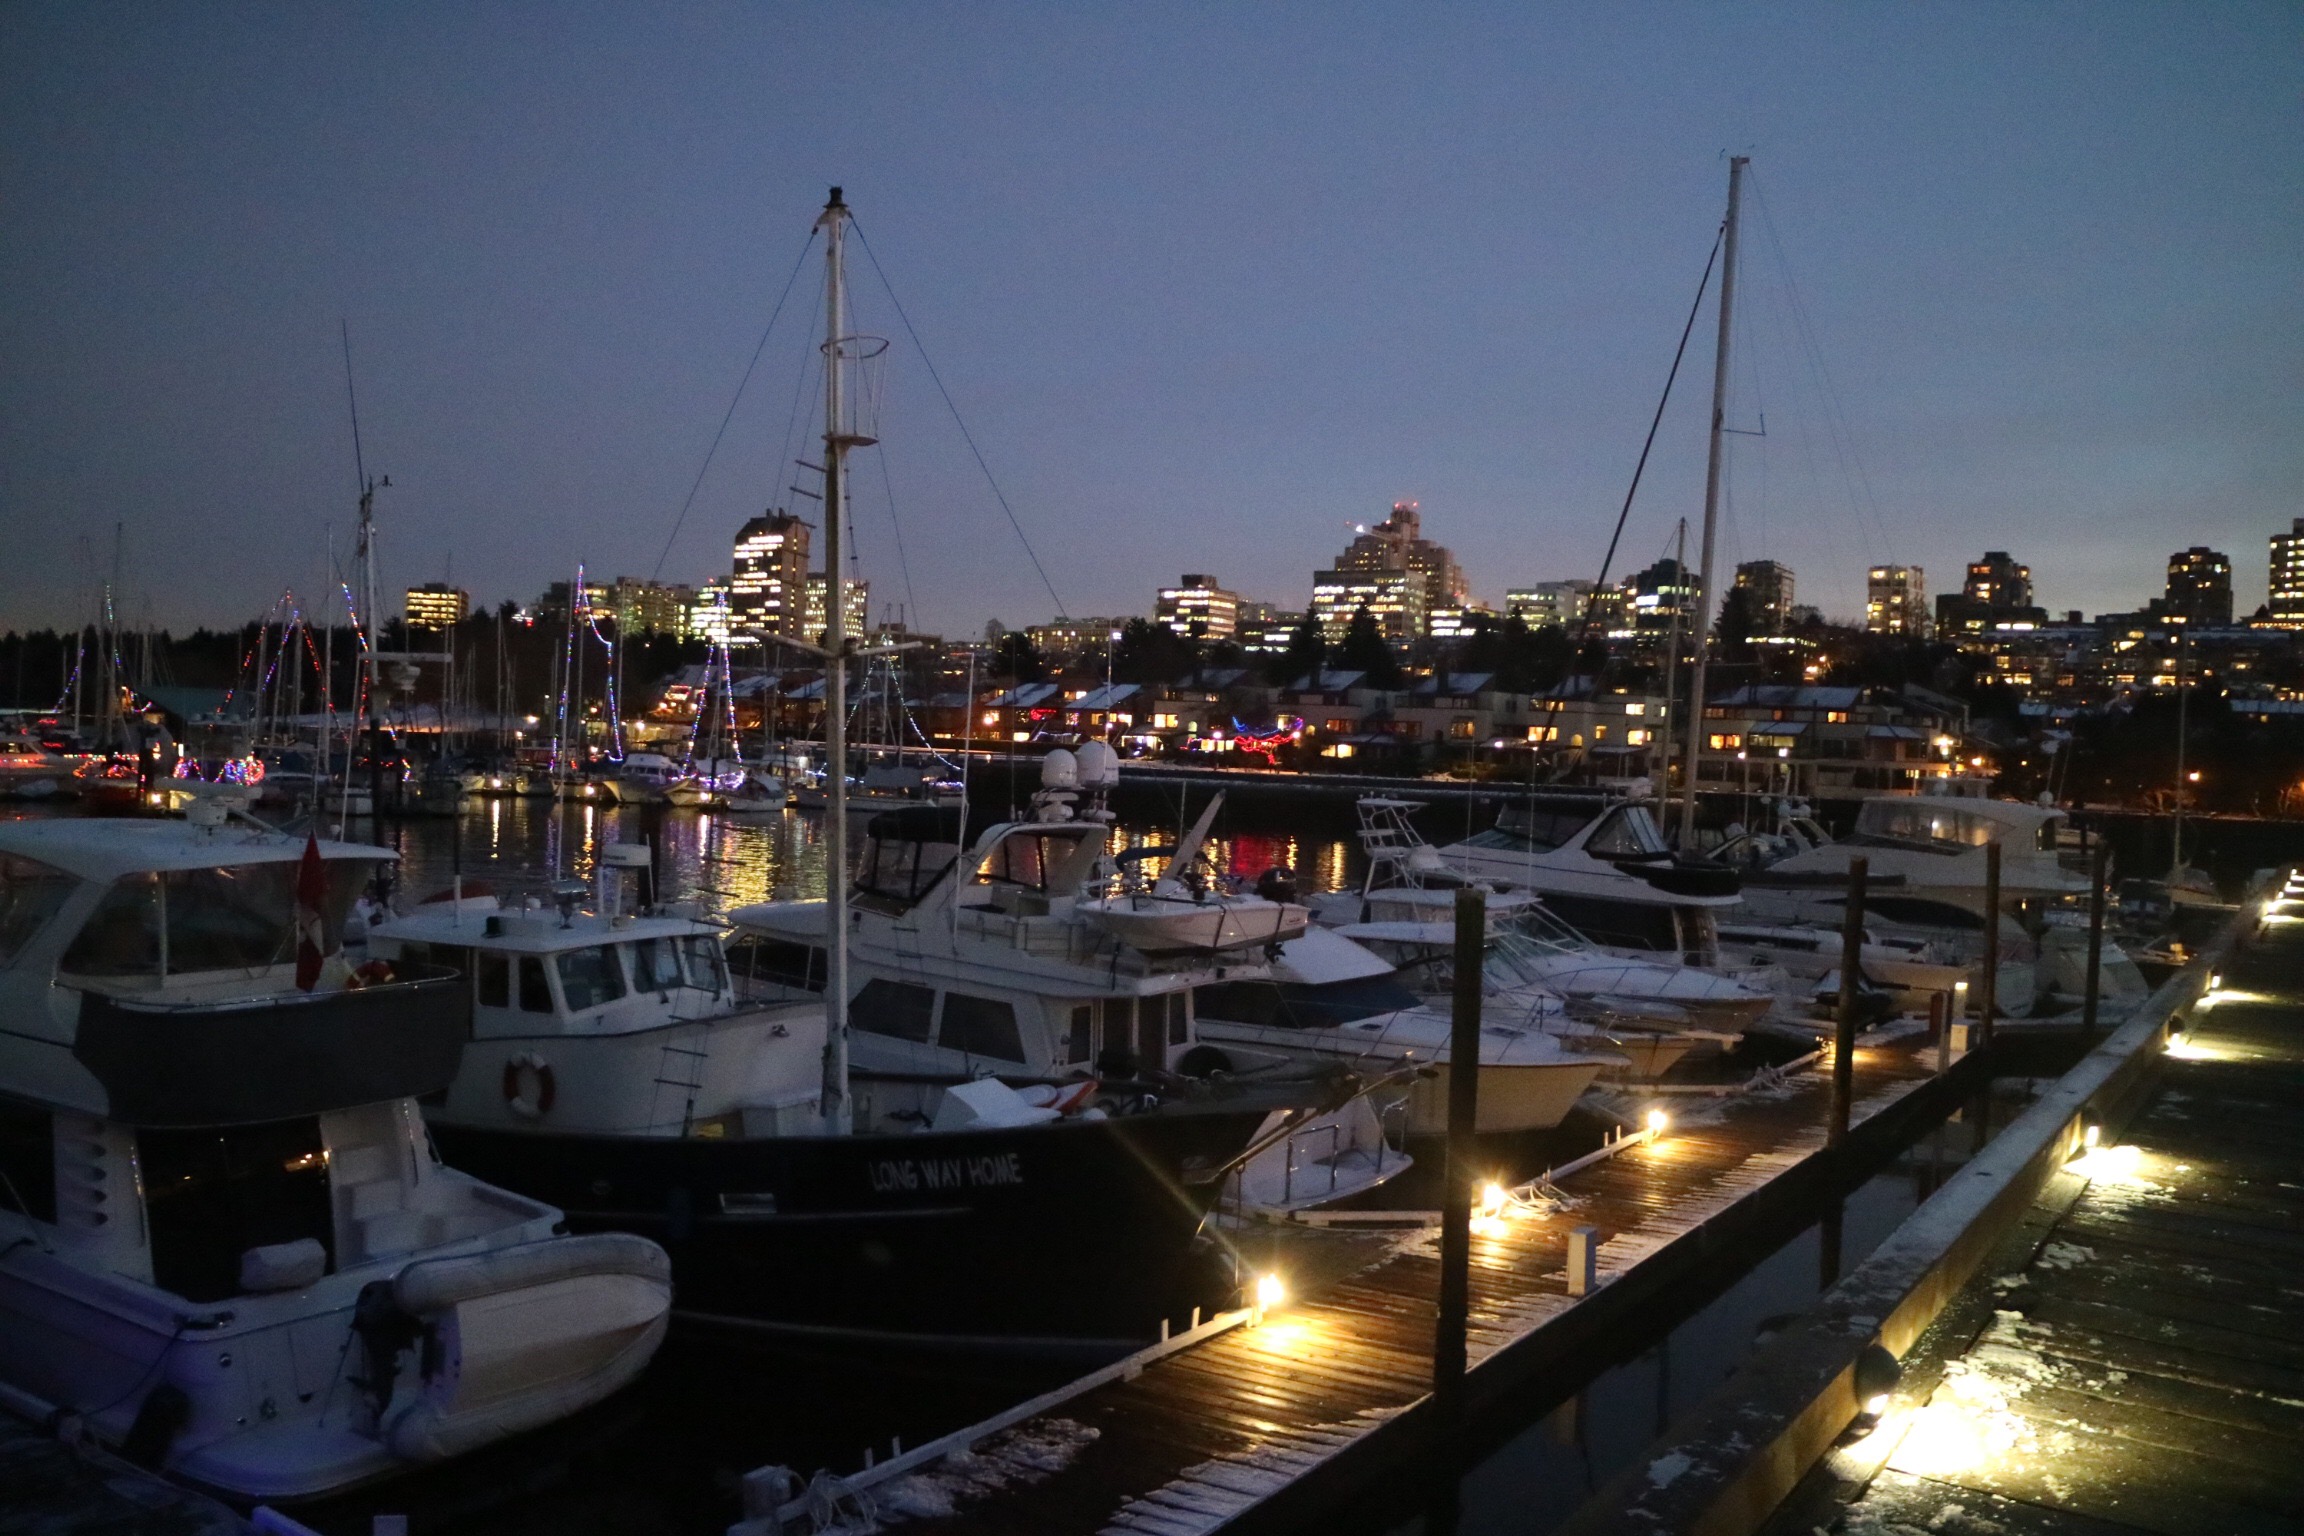 Views from Dockside Restaurant patio